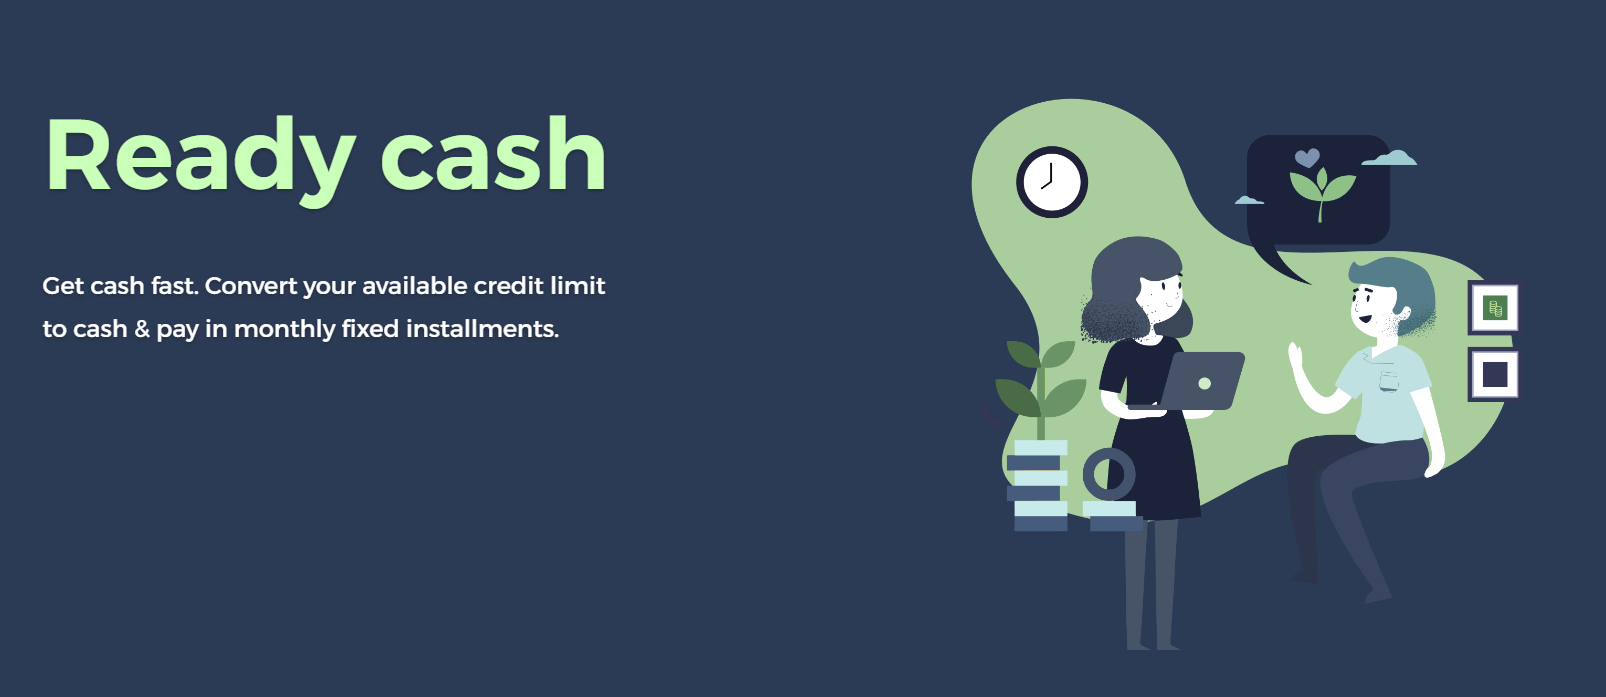 security bank credit card installment - ready cash